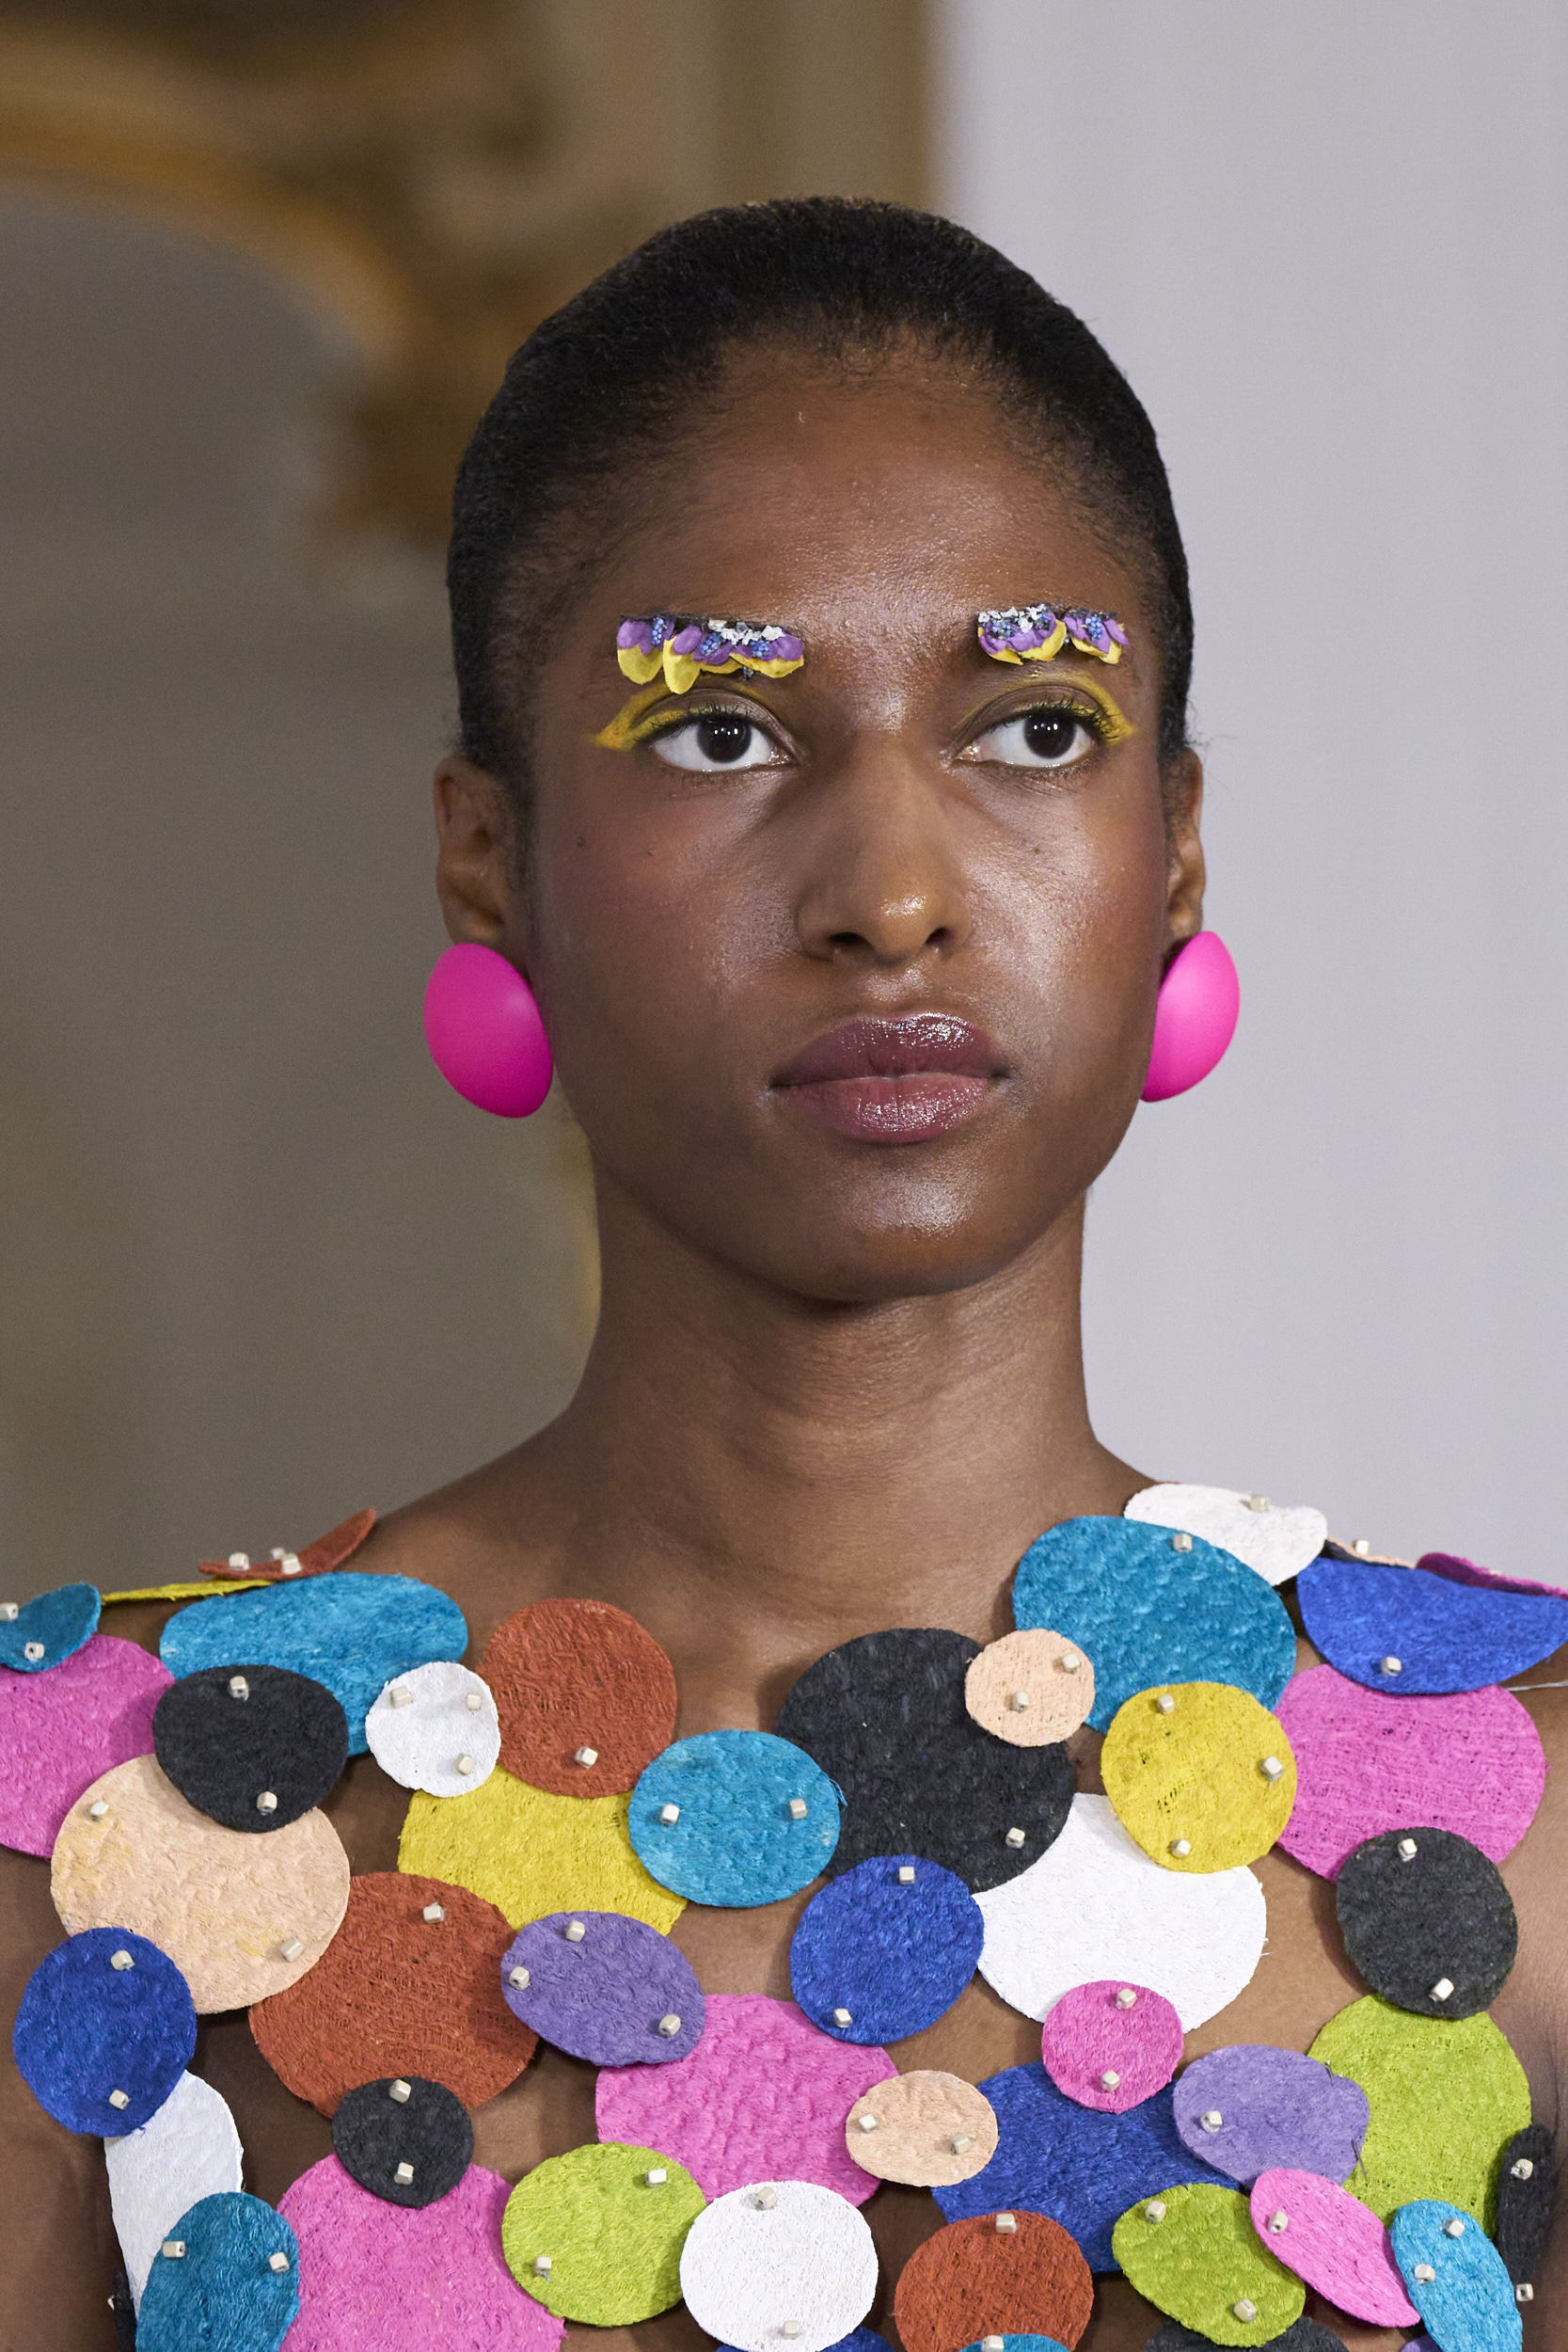 Imane Ayissi Fall 2023 Couture Fashion Show Details